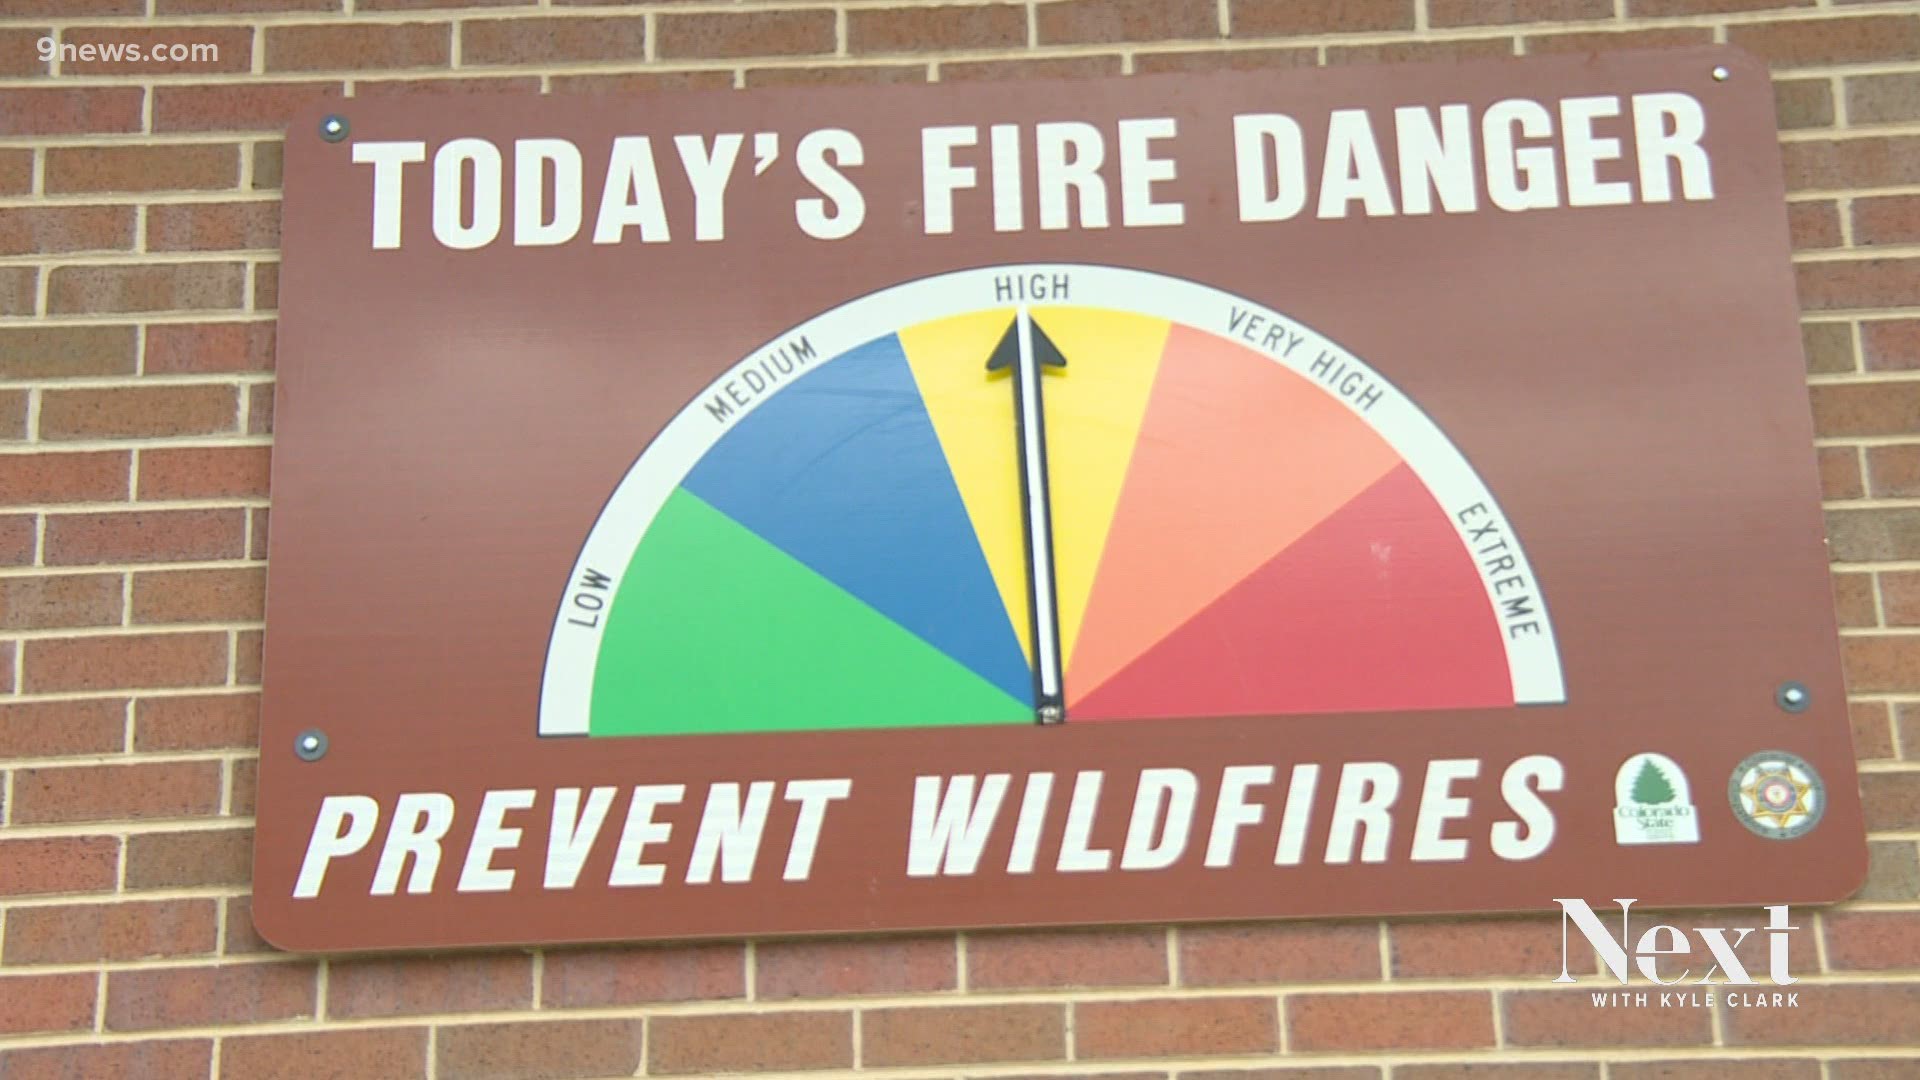 Each Colorado county has the power to implement fire restrictions, which is why each county fire ban is different.